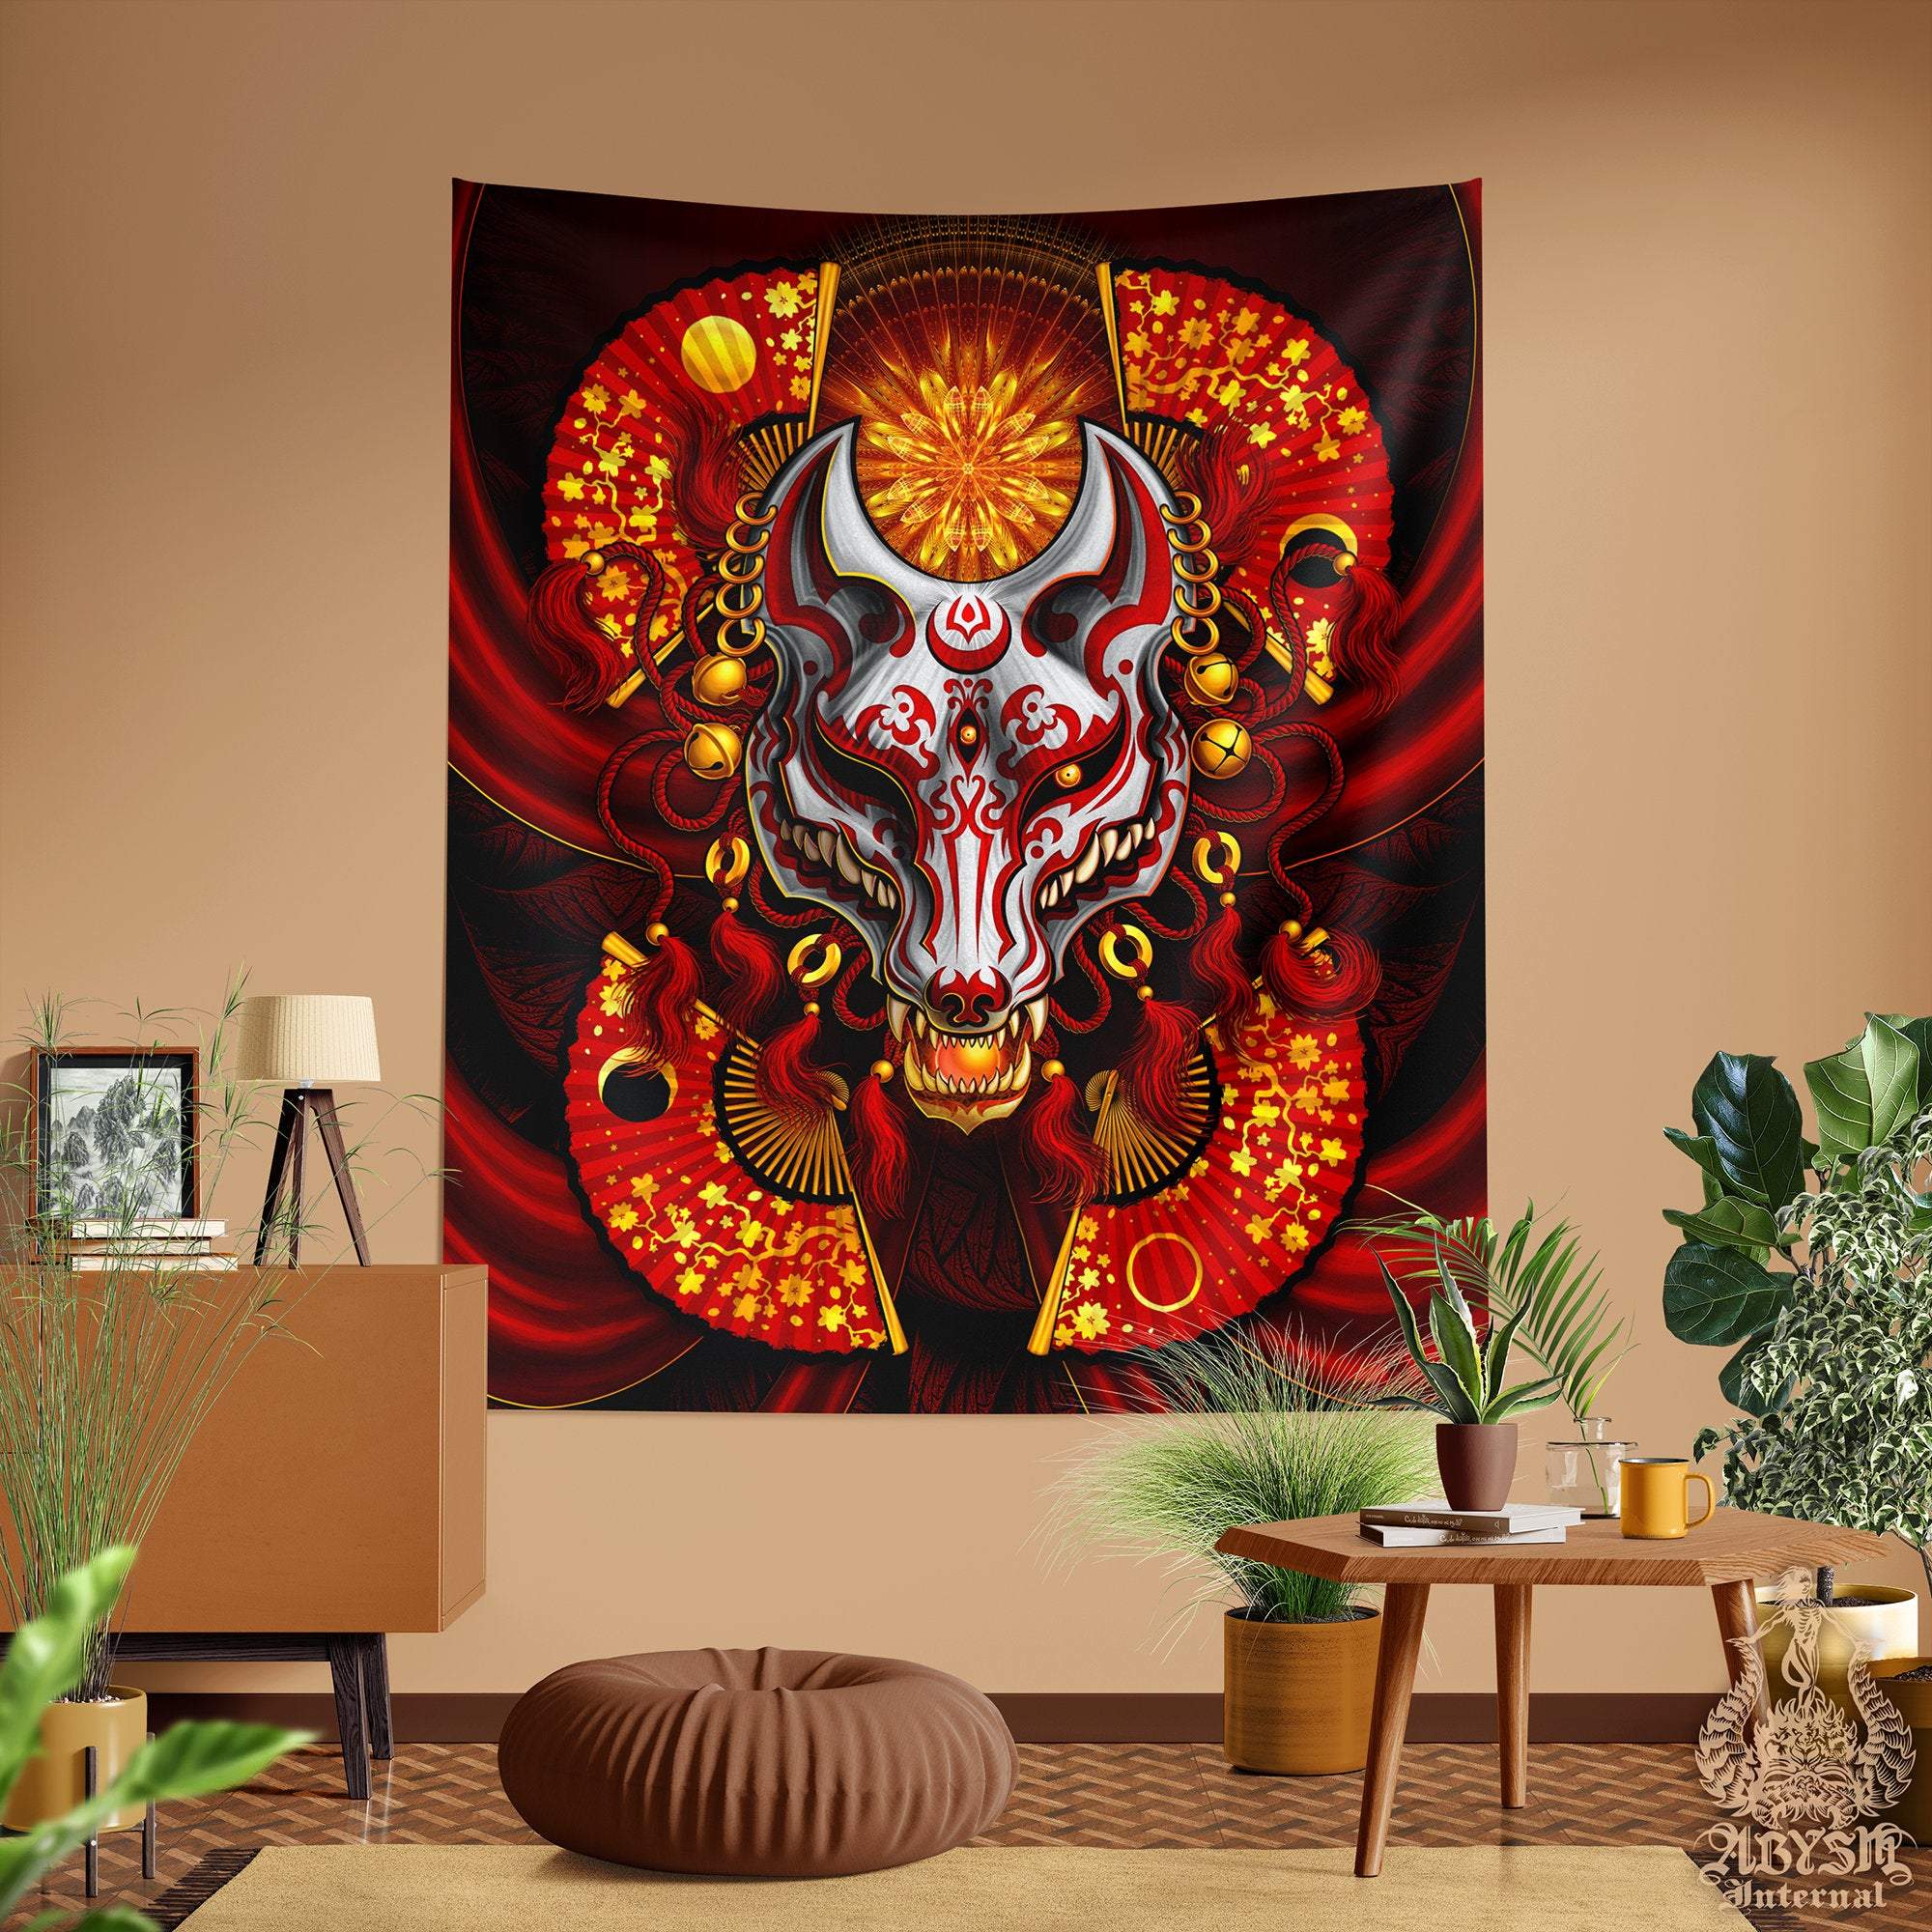 Kitsune Tapestry, Japanese Wall Hanging, Anime and Gamer Home Decor, Art Print, Okami, Fox Mask, Eclectic and Funky - Red & White - Abysm Internal